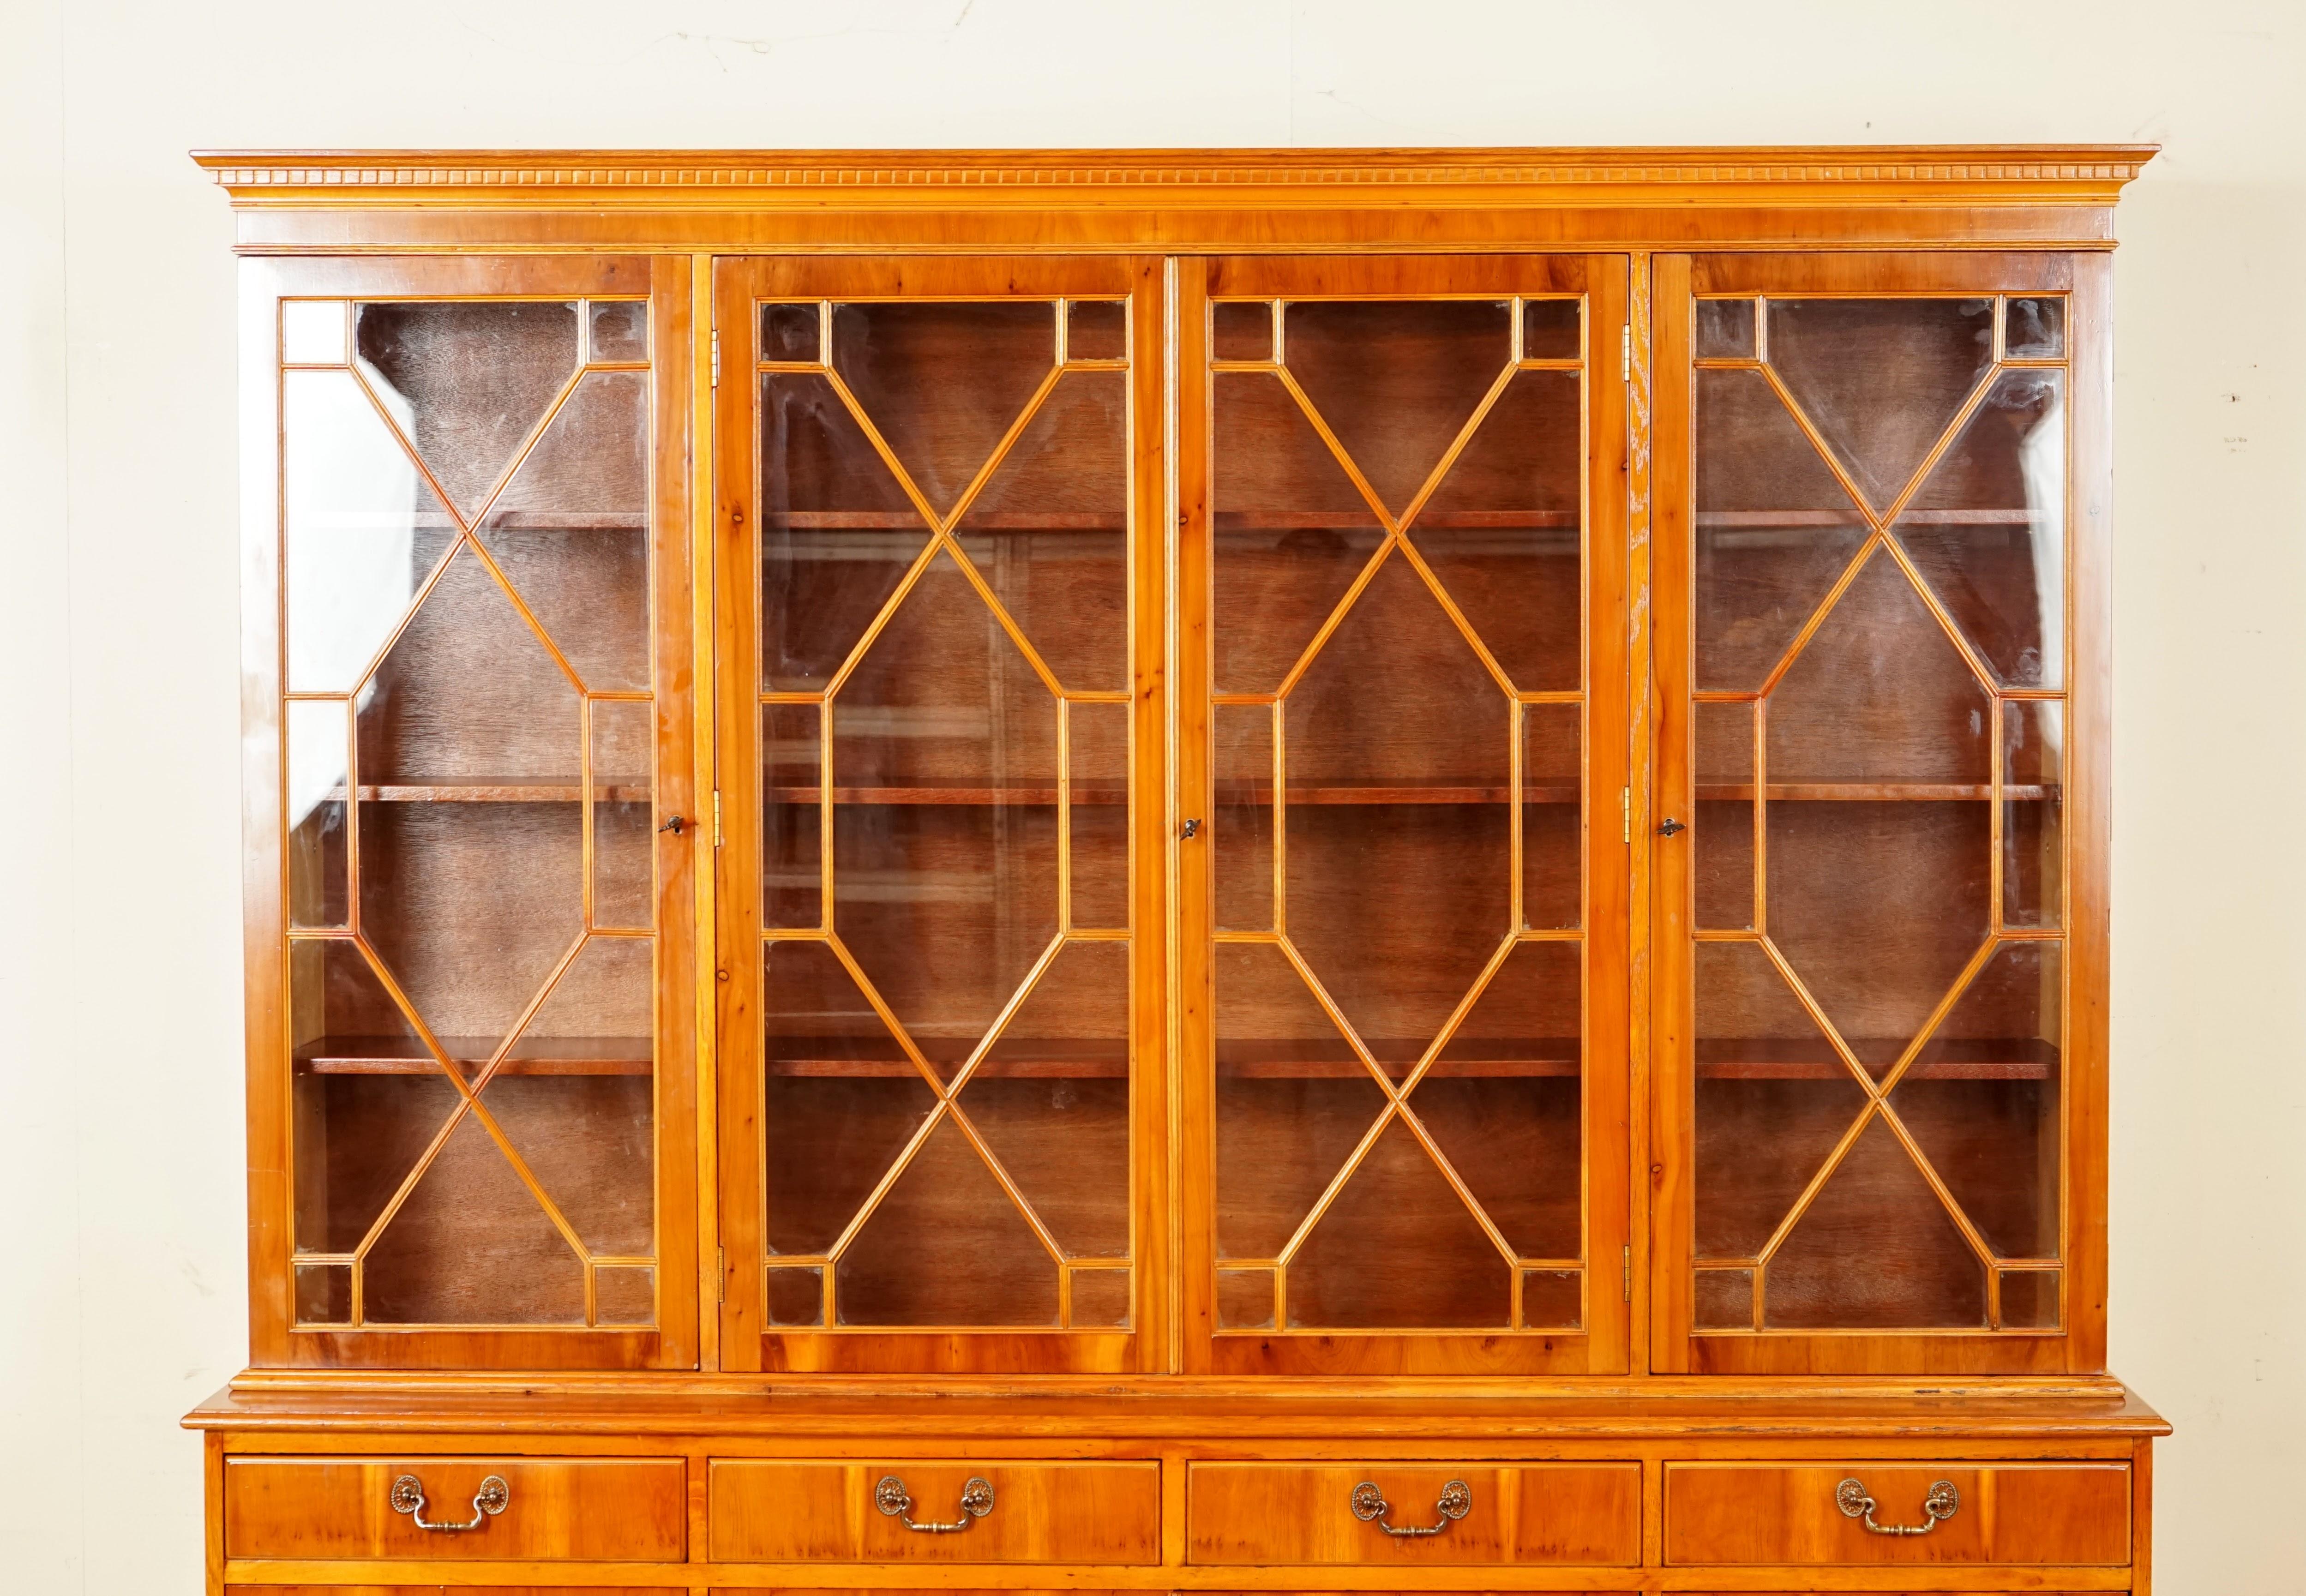 Hand-Crafted Vintage Burr Yew Wood Display Cabinet Bookcase with Keys